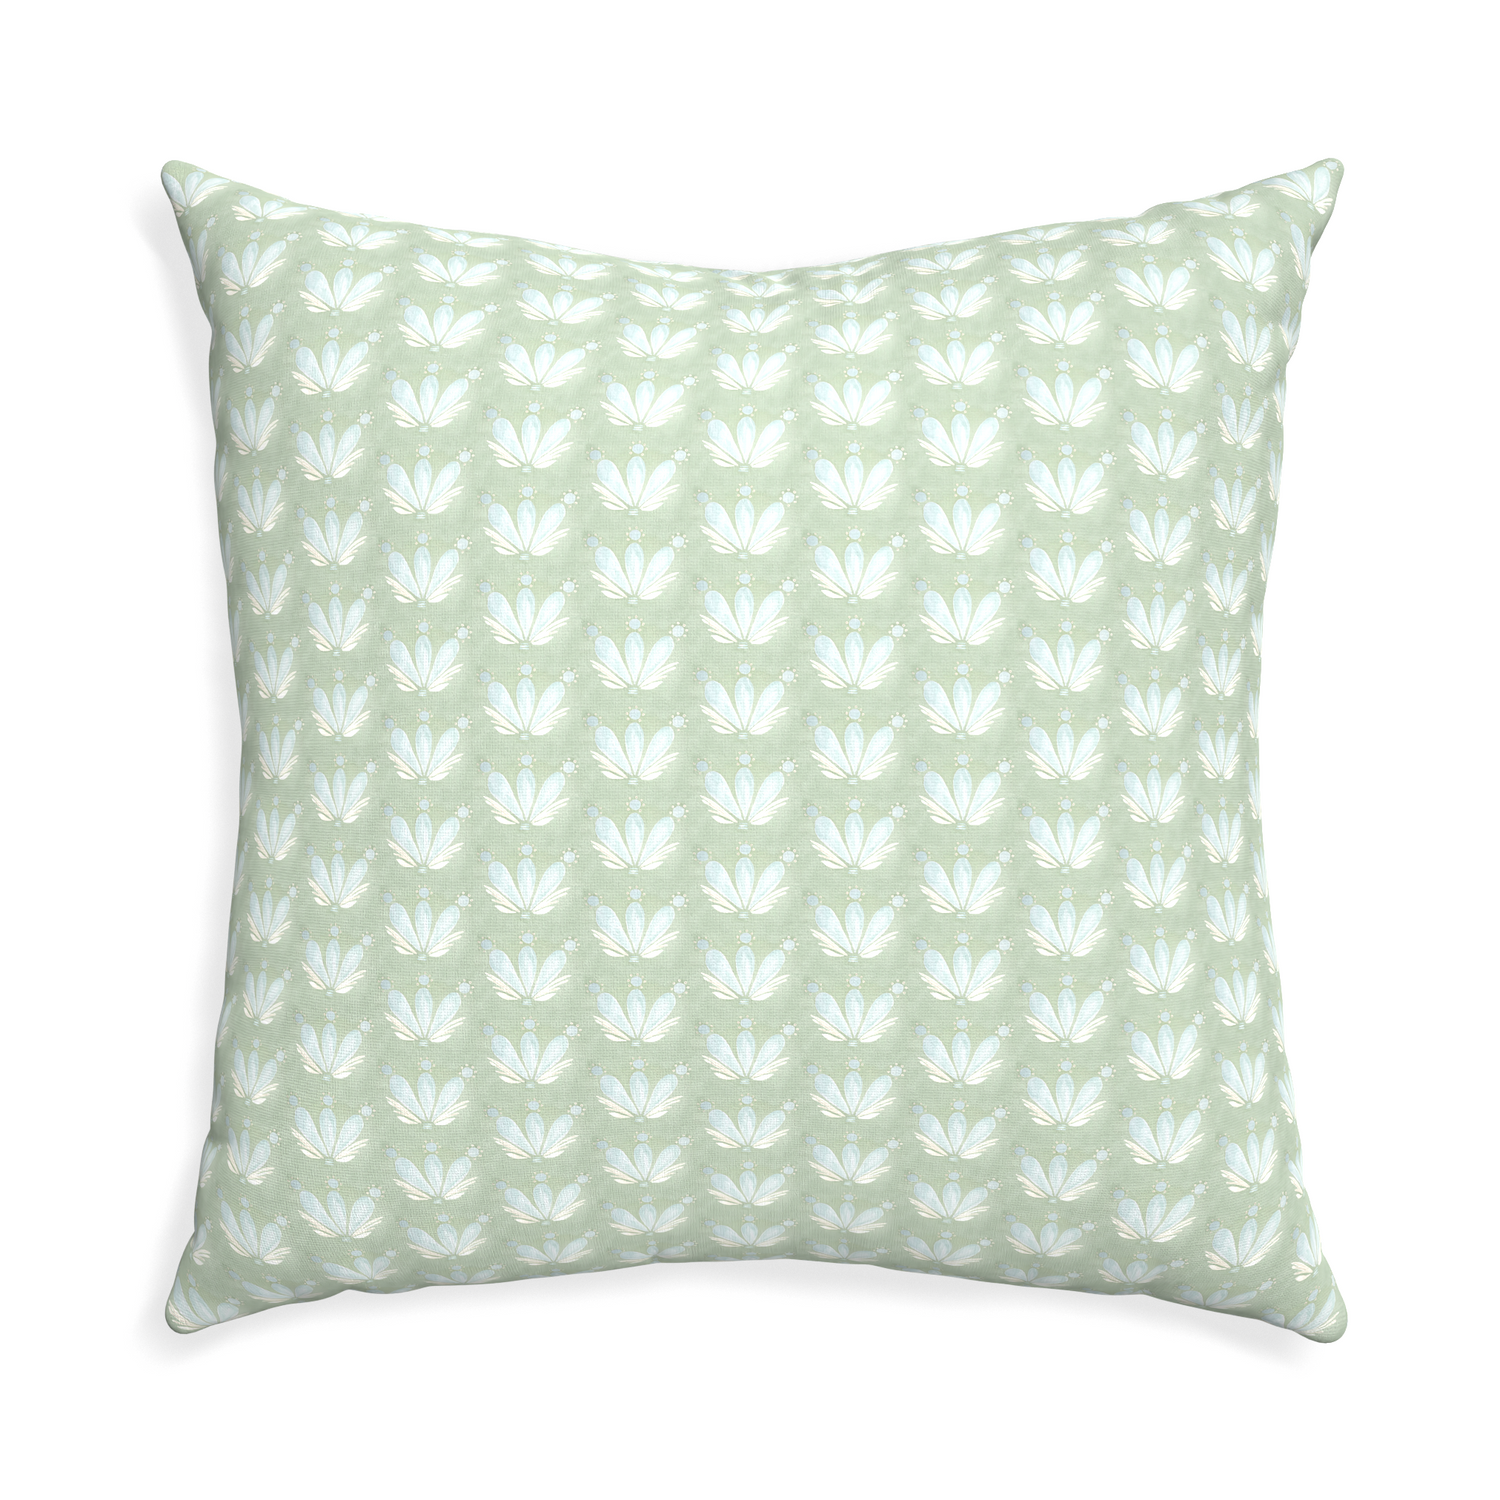 Euro-sham serena sea salt custom blue & green floral drop repeatpillow with none on white background